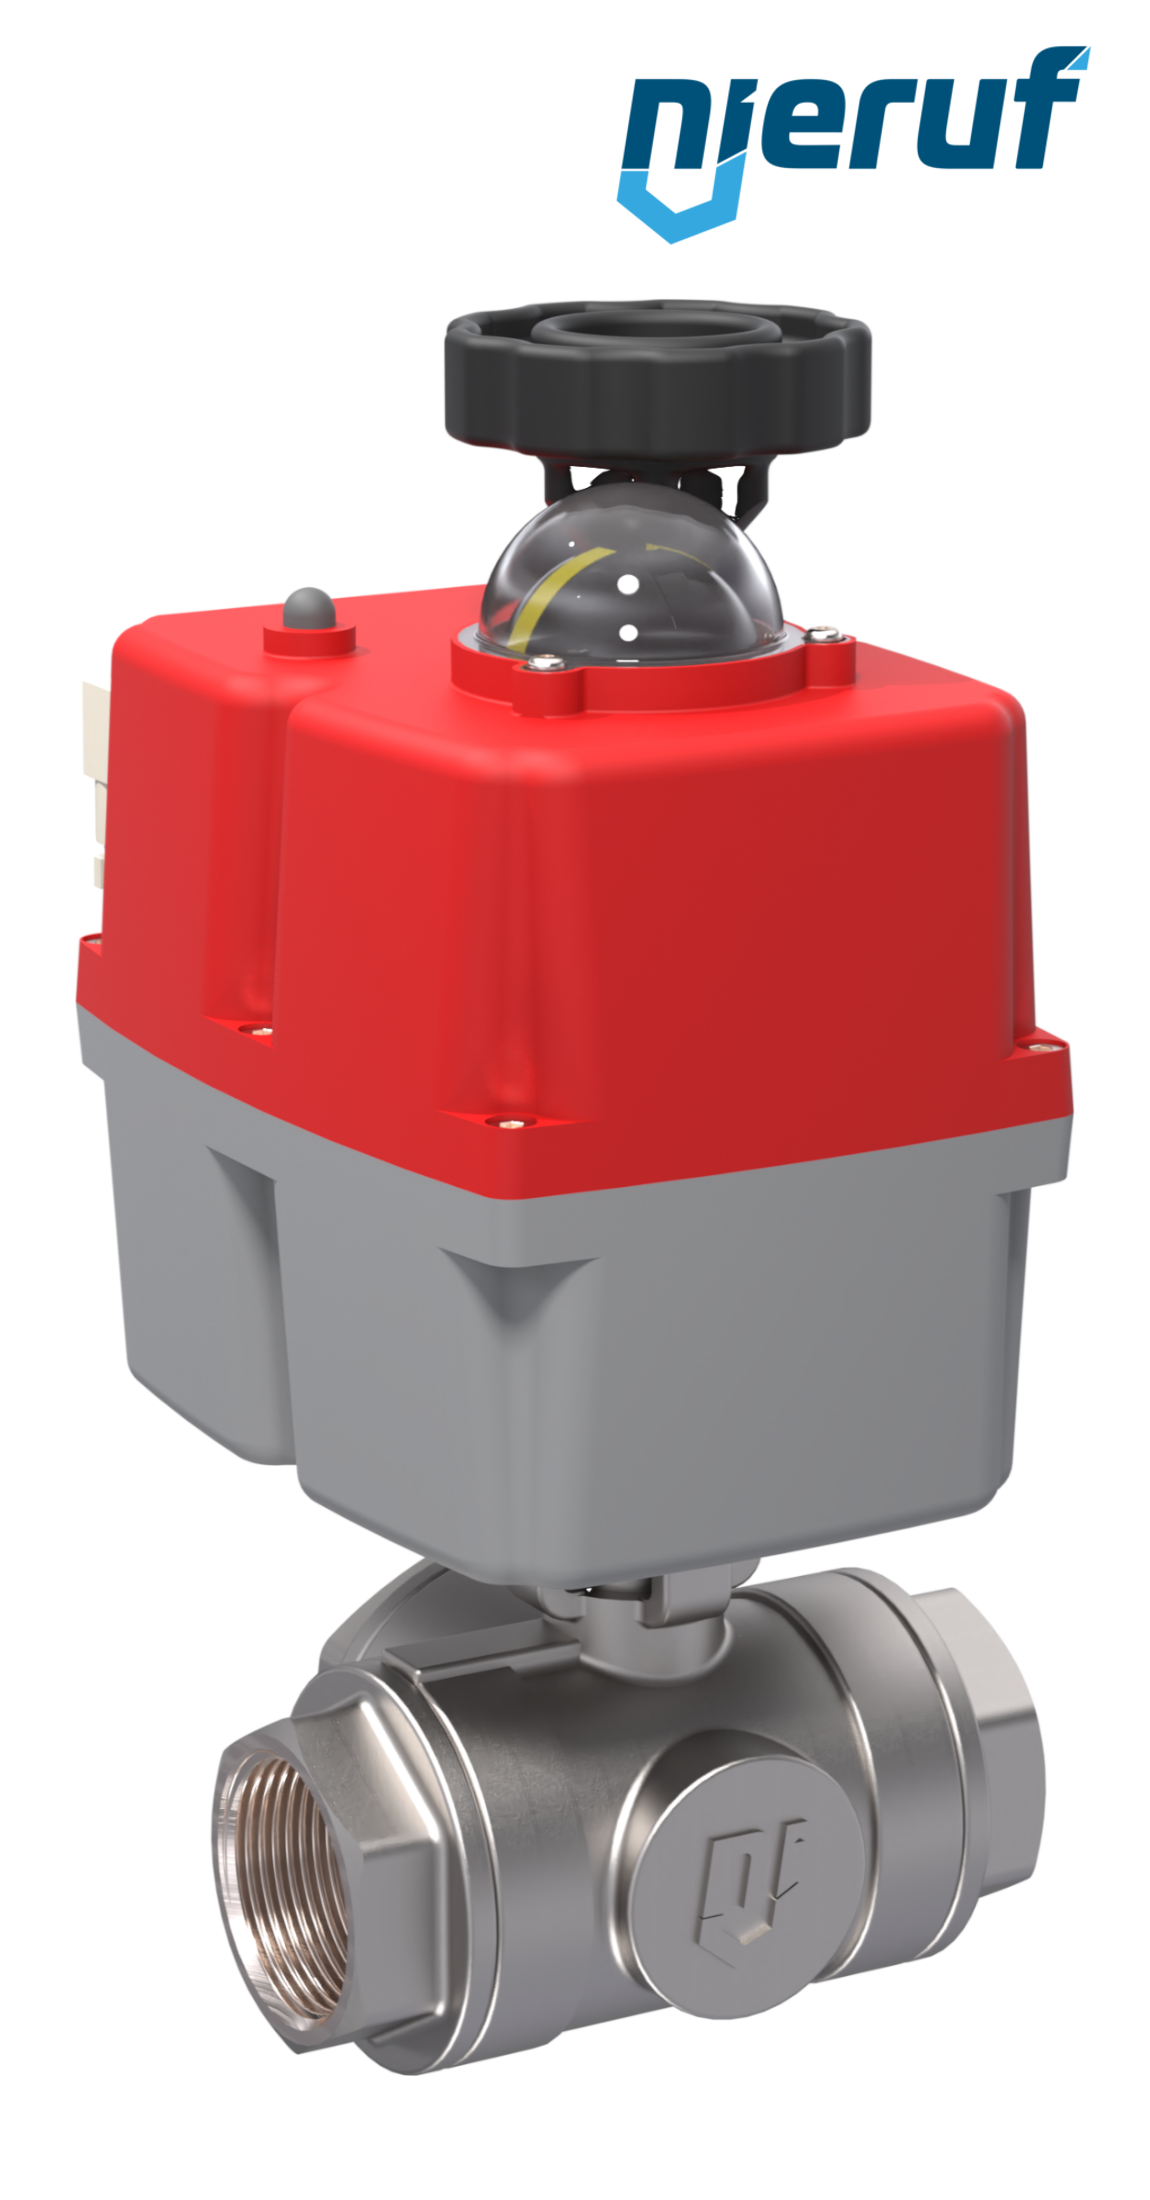 3 way automatic-ball valve 24-240V DN20 - 3/4" inch stainless steel reduced port design with L drilling